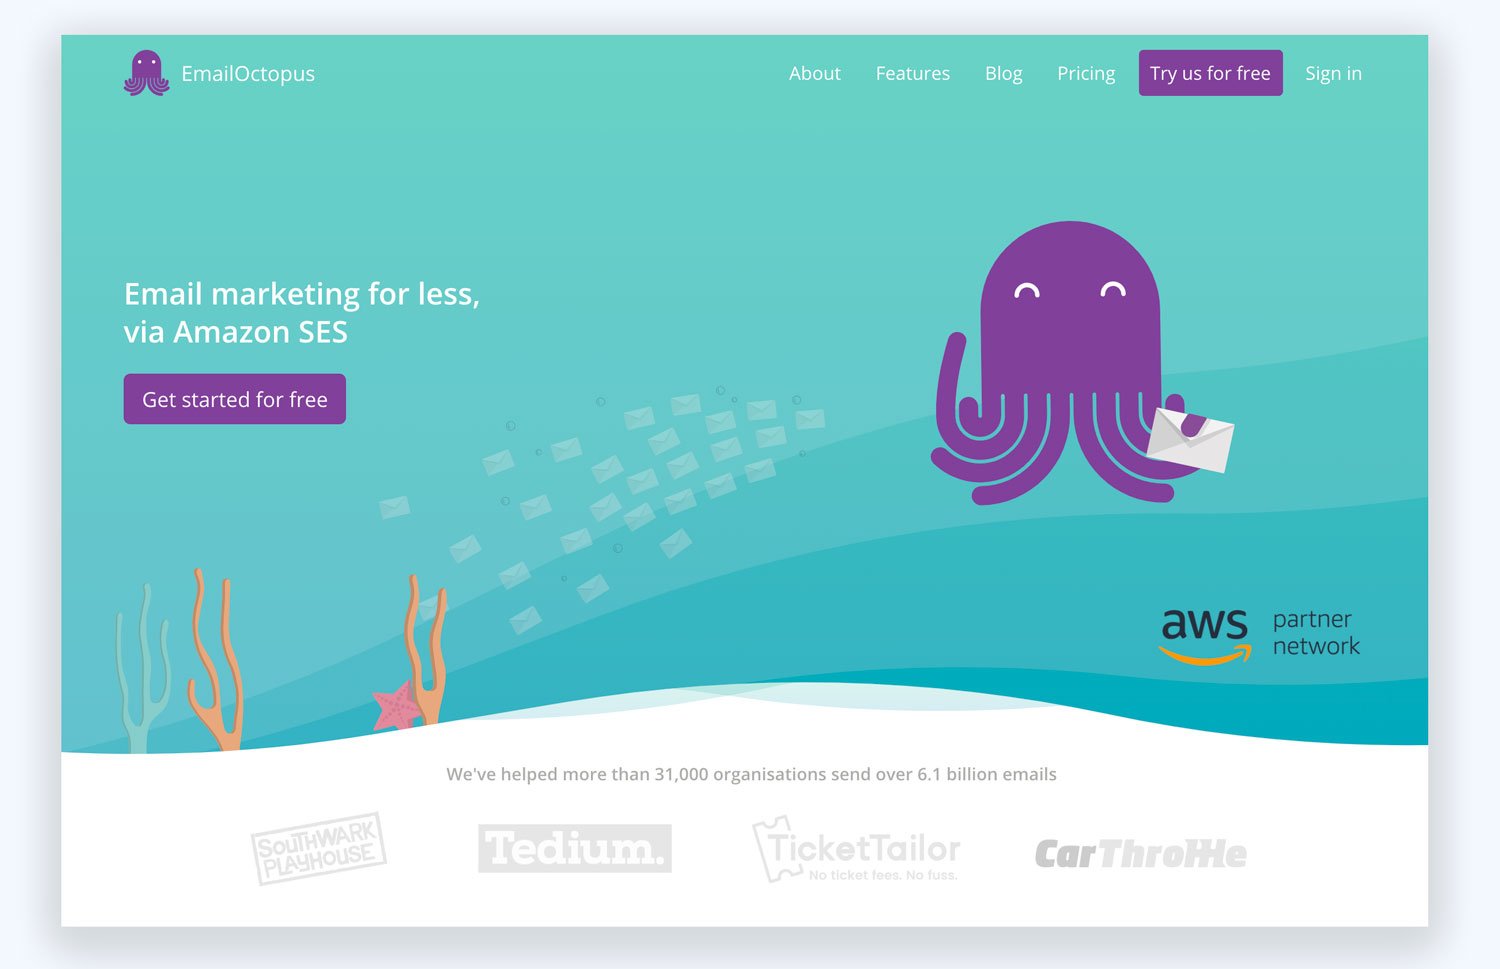 Email Octobus Email Marketing with Amazon SES